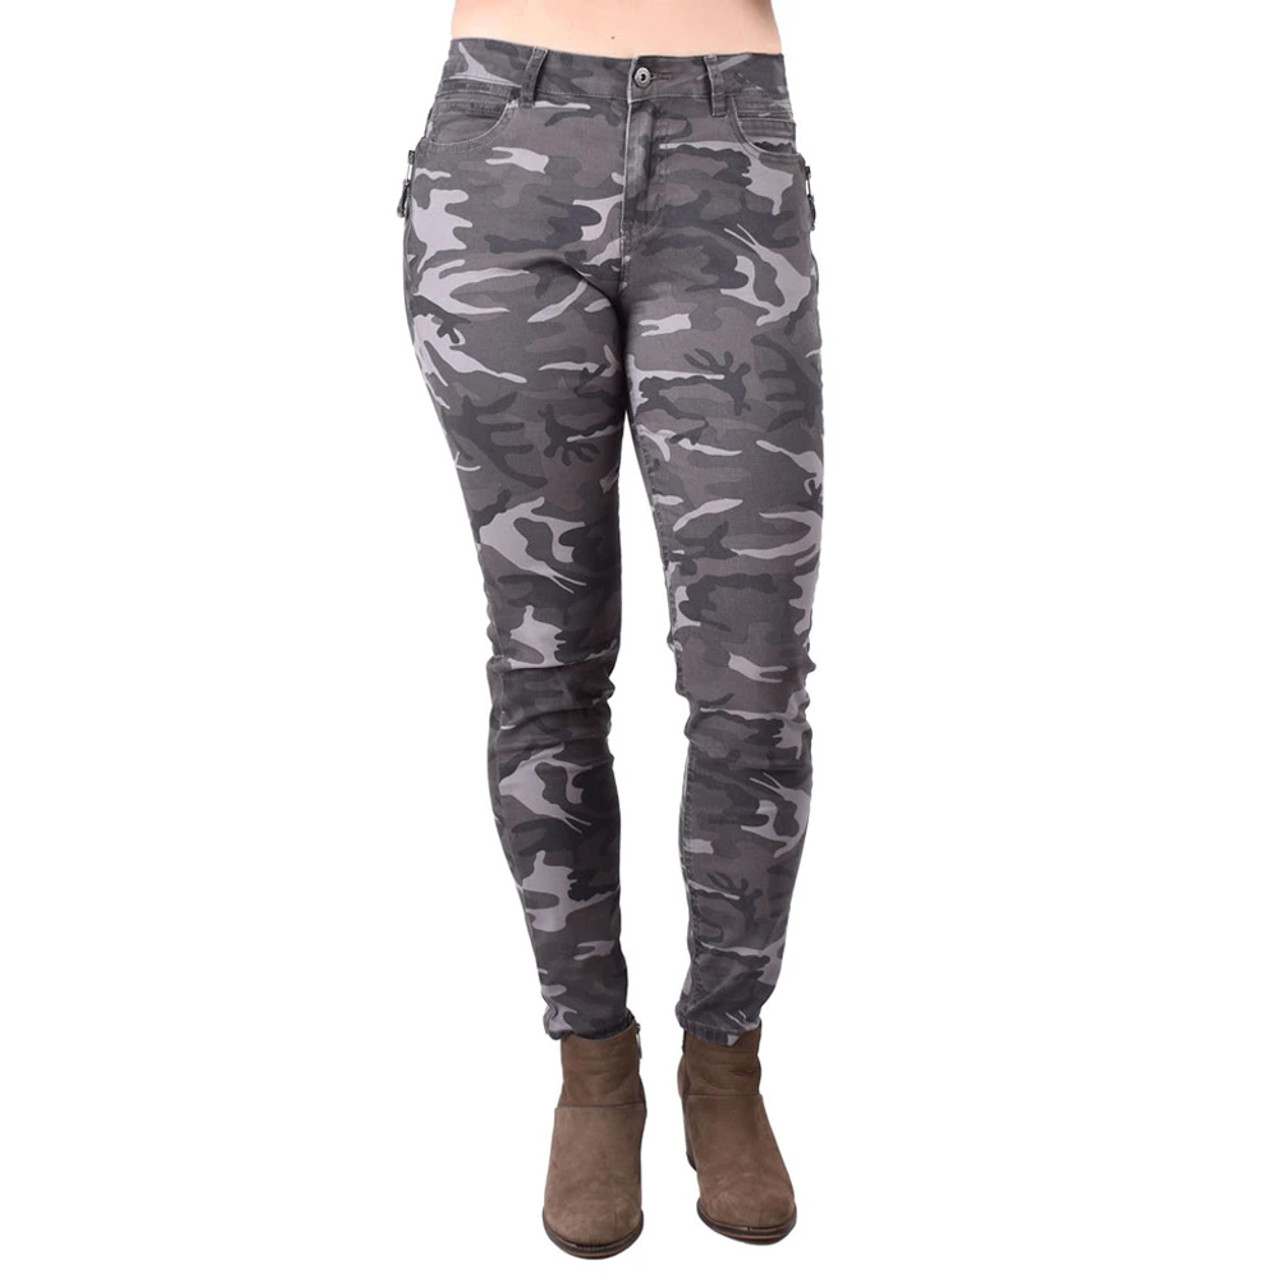 Jeans & Trousers | Tokyo Talkies Camouflage Denim Jeans For Women | Freeup